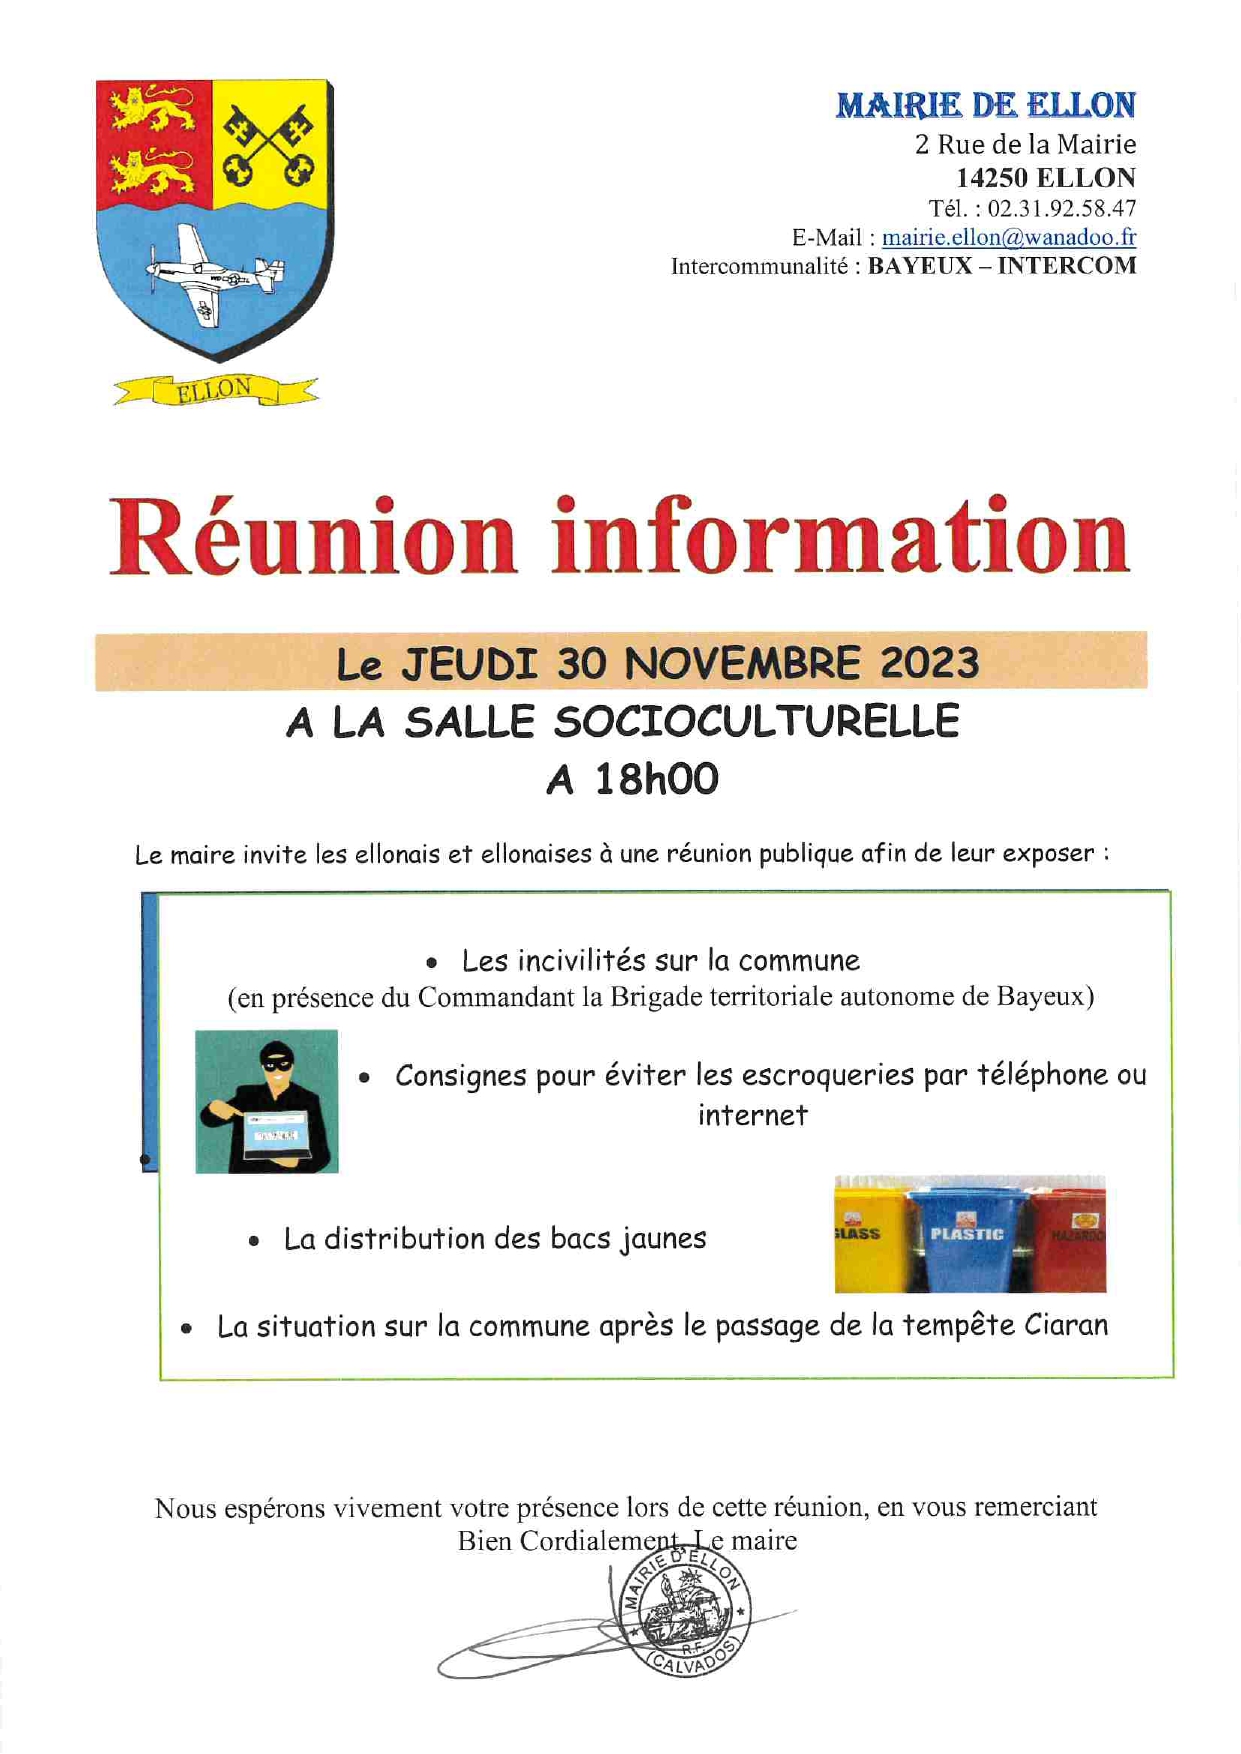 reunion information page 0001